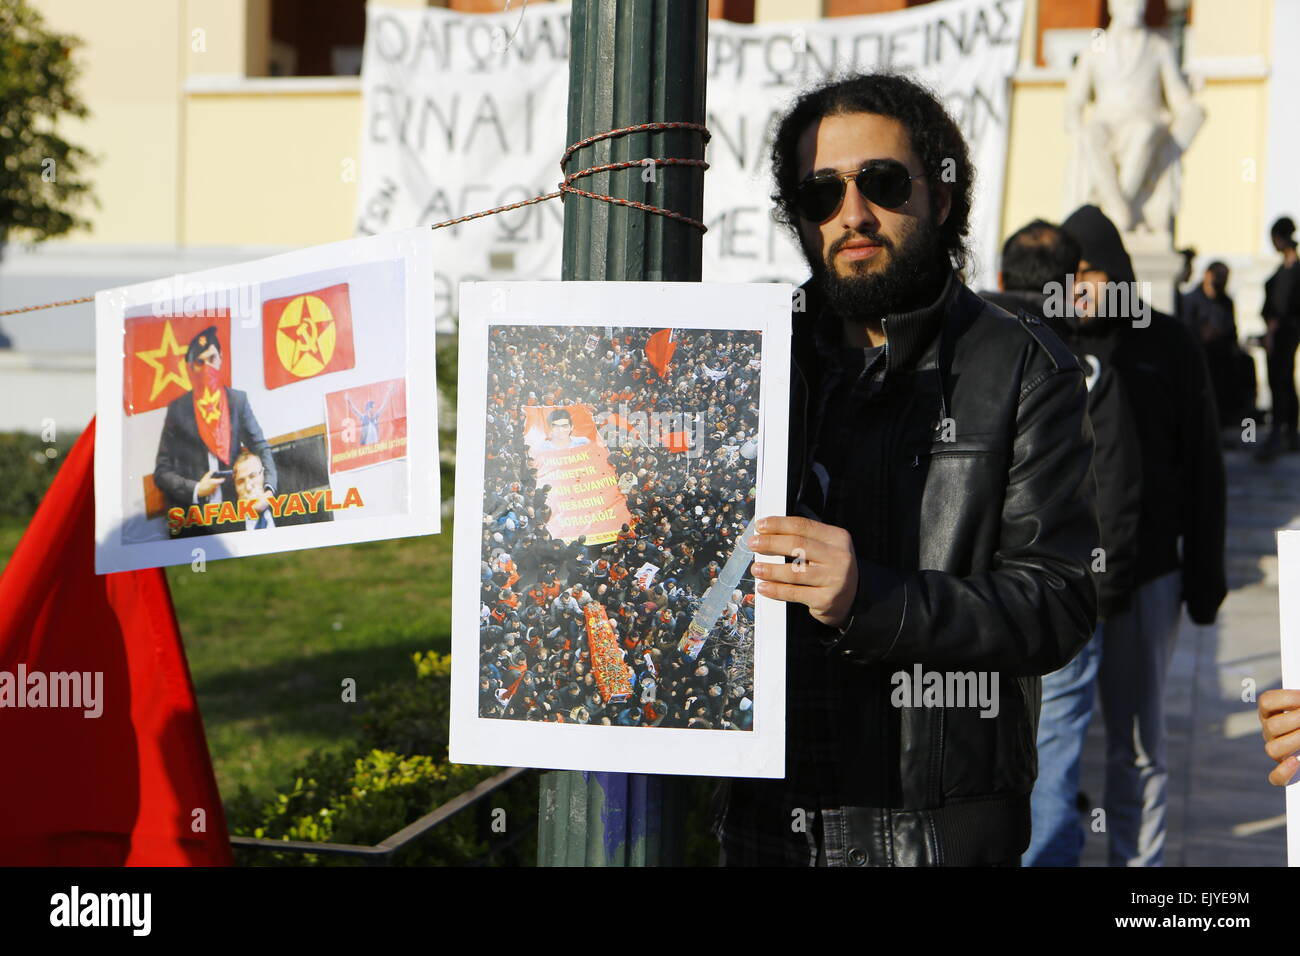 Athens, Greece. 02nd Apr, 2015. A protester holds a picture from the funeral of 15 year old Berkin Elvan, and another picture shows one of the hostage takers, ?afak Yayla with his hostage. A handful of protesters showed their solidarity with the two killed activists who had taken a prosecutor hostage in a Istanbul court house. They were calling for the truth in the killing of 15 year old Berkin Elvan who died during the Gezi protests after being hit by a tear gas canister from the police. © Michael Debets/Pacific Press/Alamy Live News Stock Photo